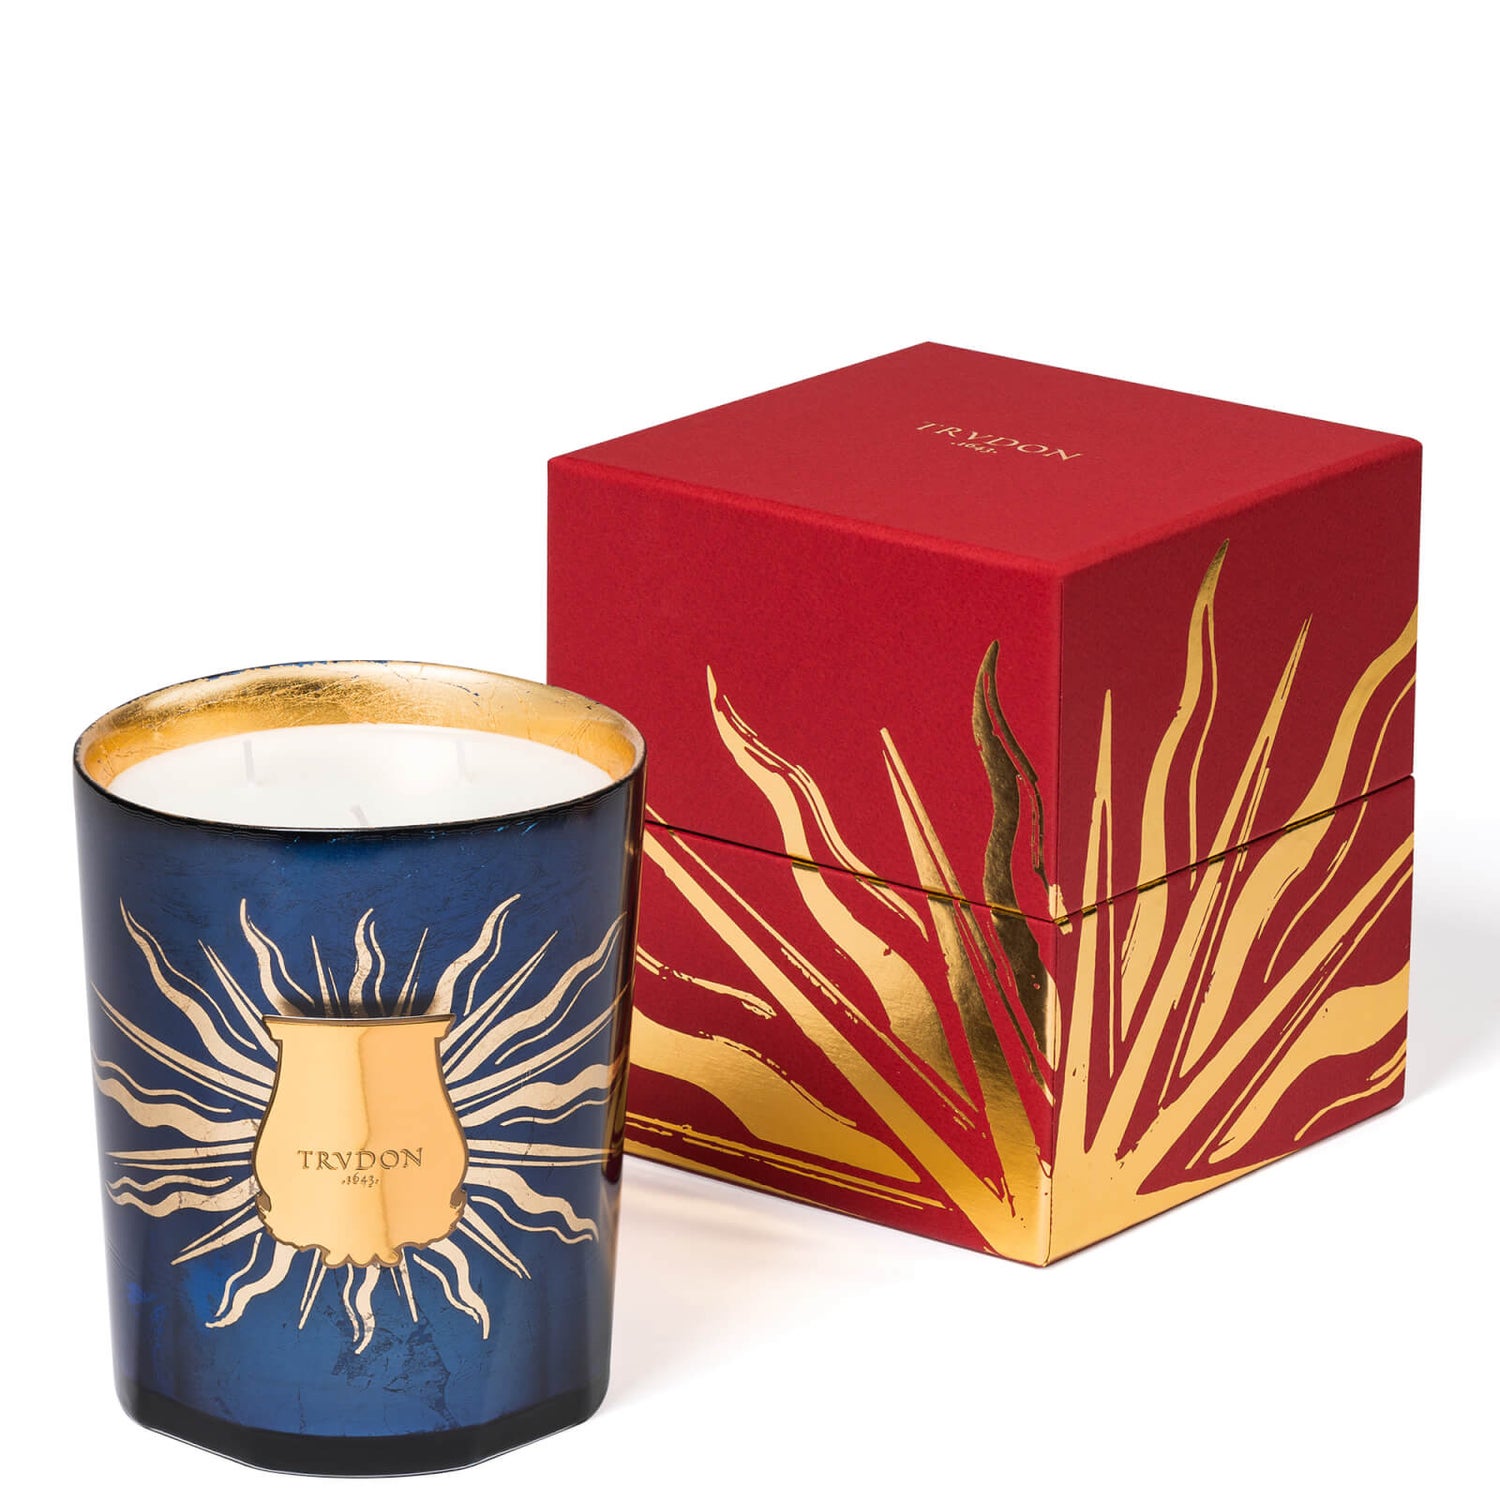 TRUDON Scented Fir Candle 800g | Cult Beauty